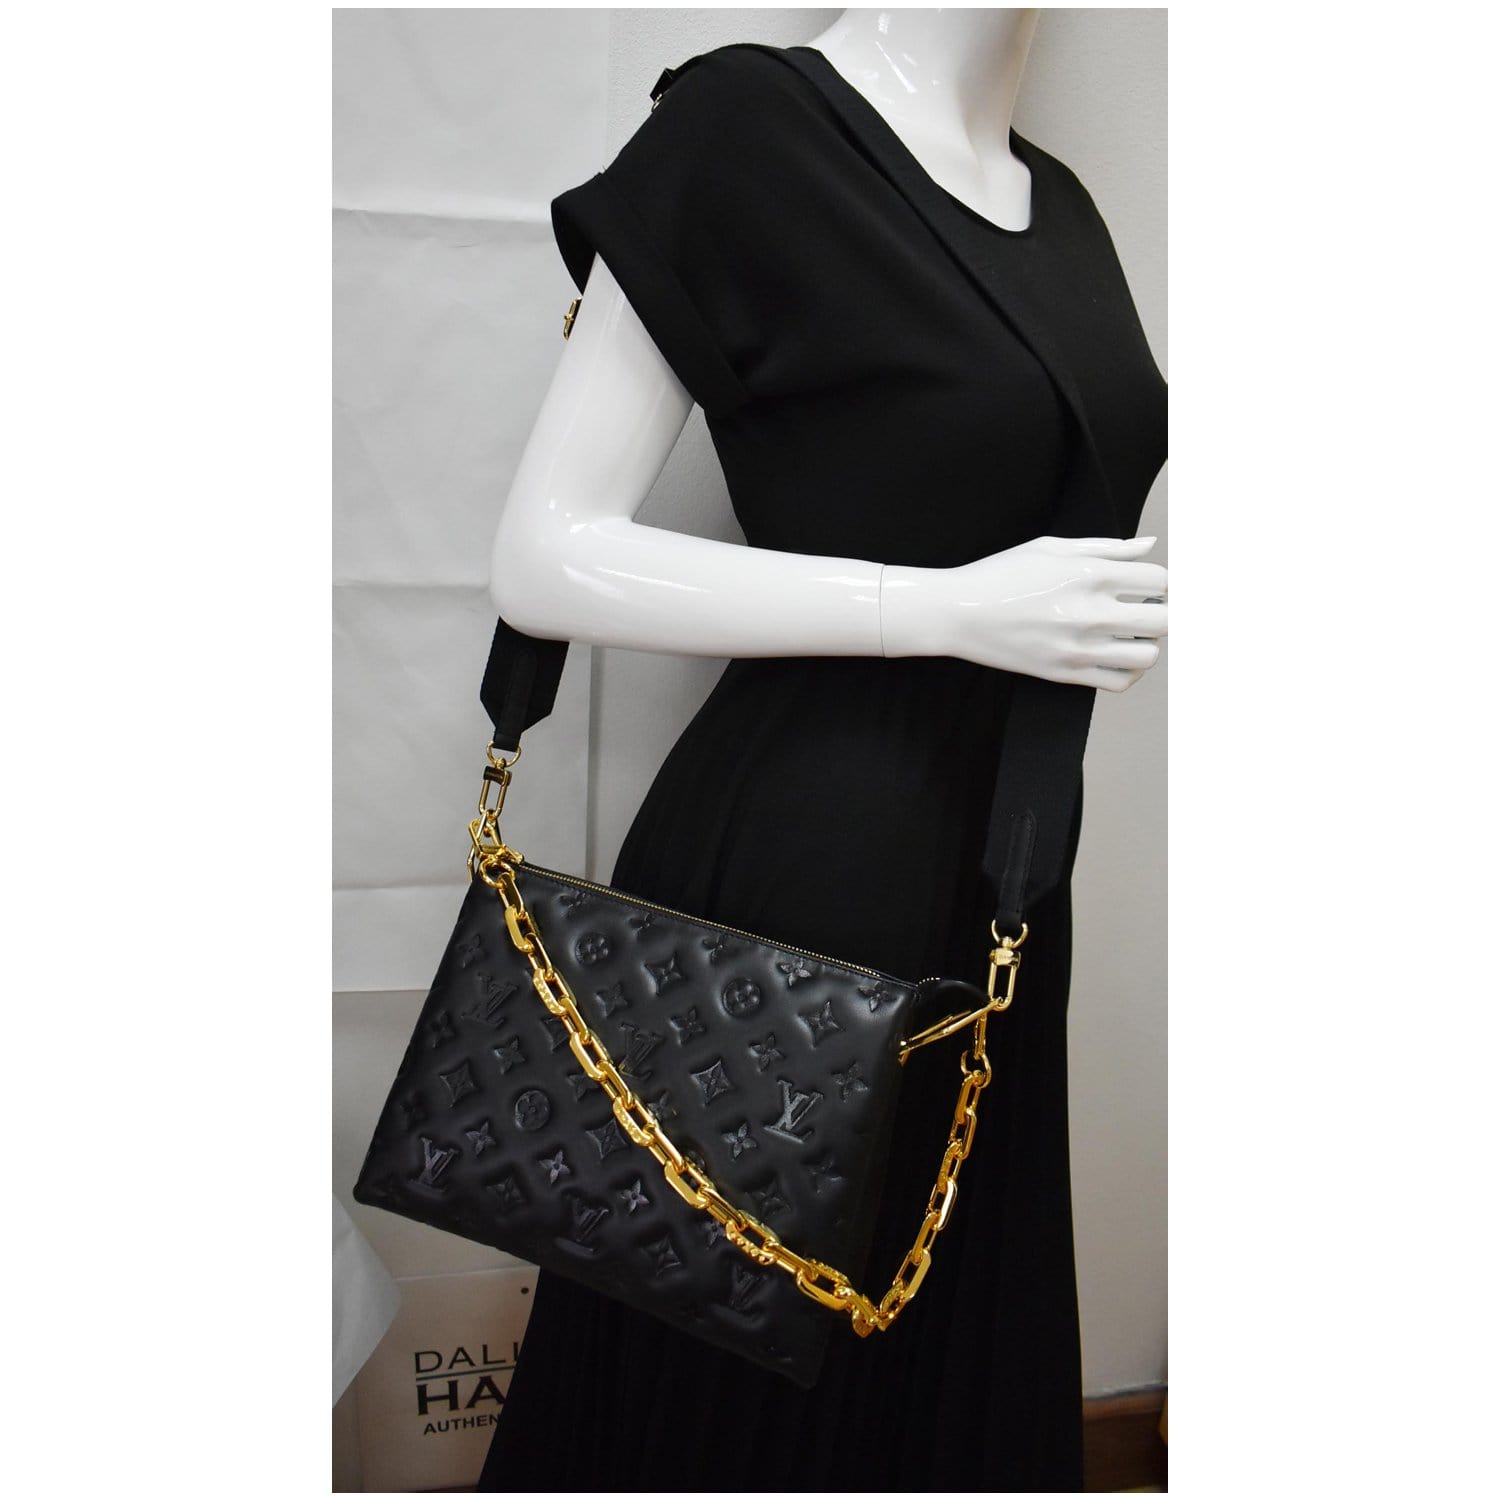 Beltbag Coussin H27 - Women - Small Leather Goods